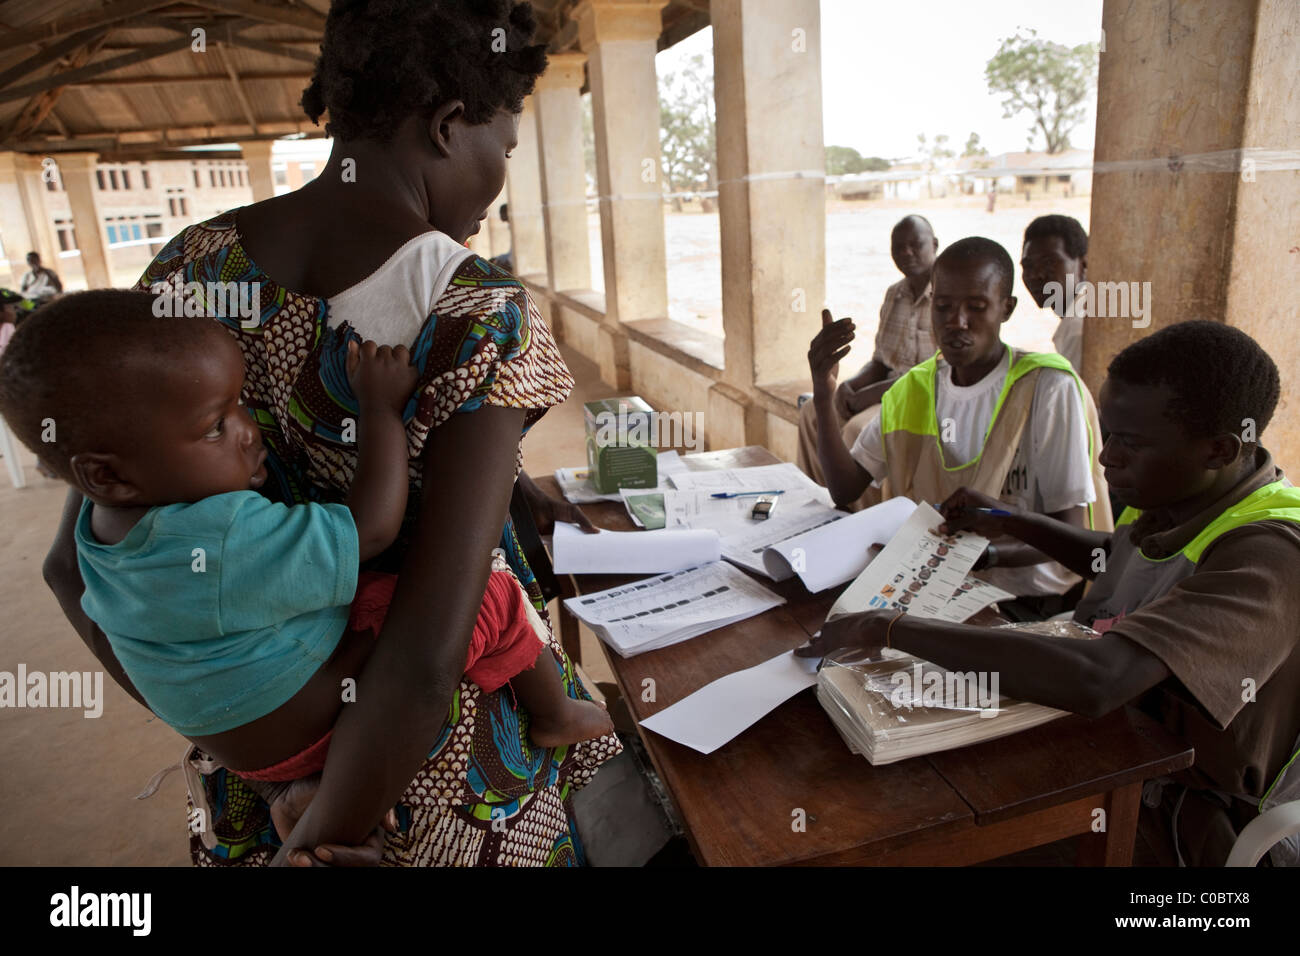 A young woman arrives at a polling station in Kumi, Uganda to cast her vote in the 2011 presidential election. Stock Photo